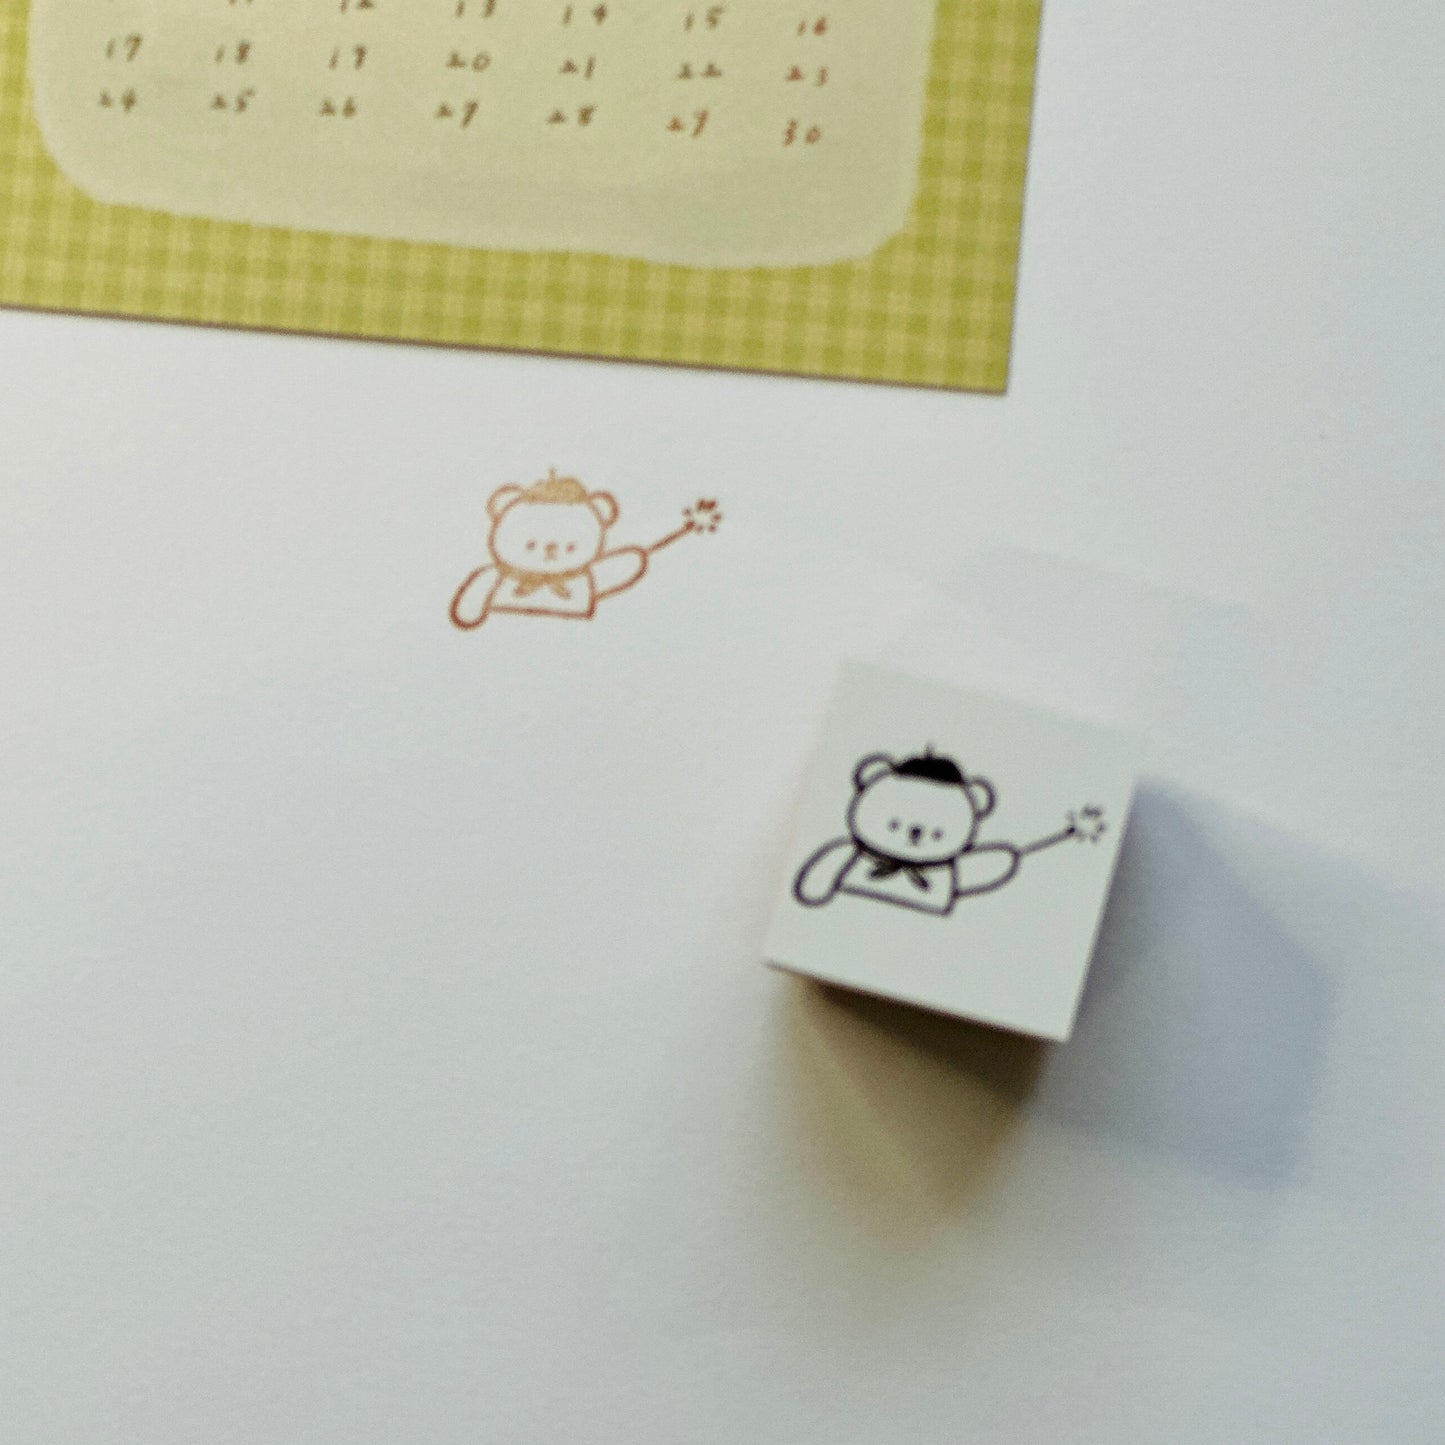 ranmyu Rubber Stamp - Bear with Magic Wand